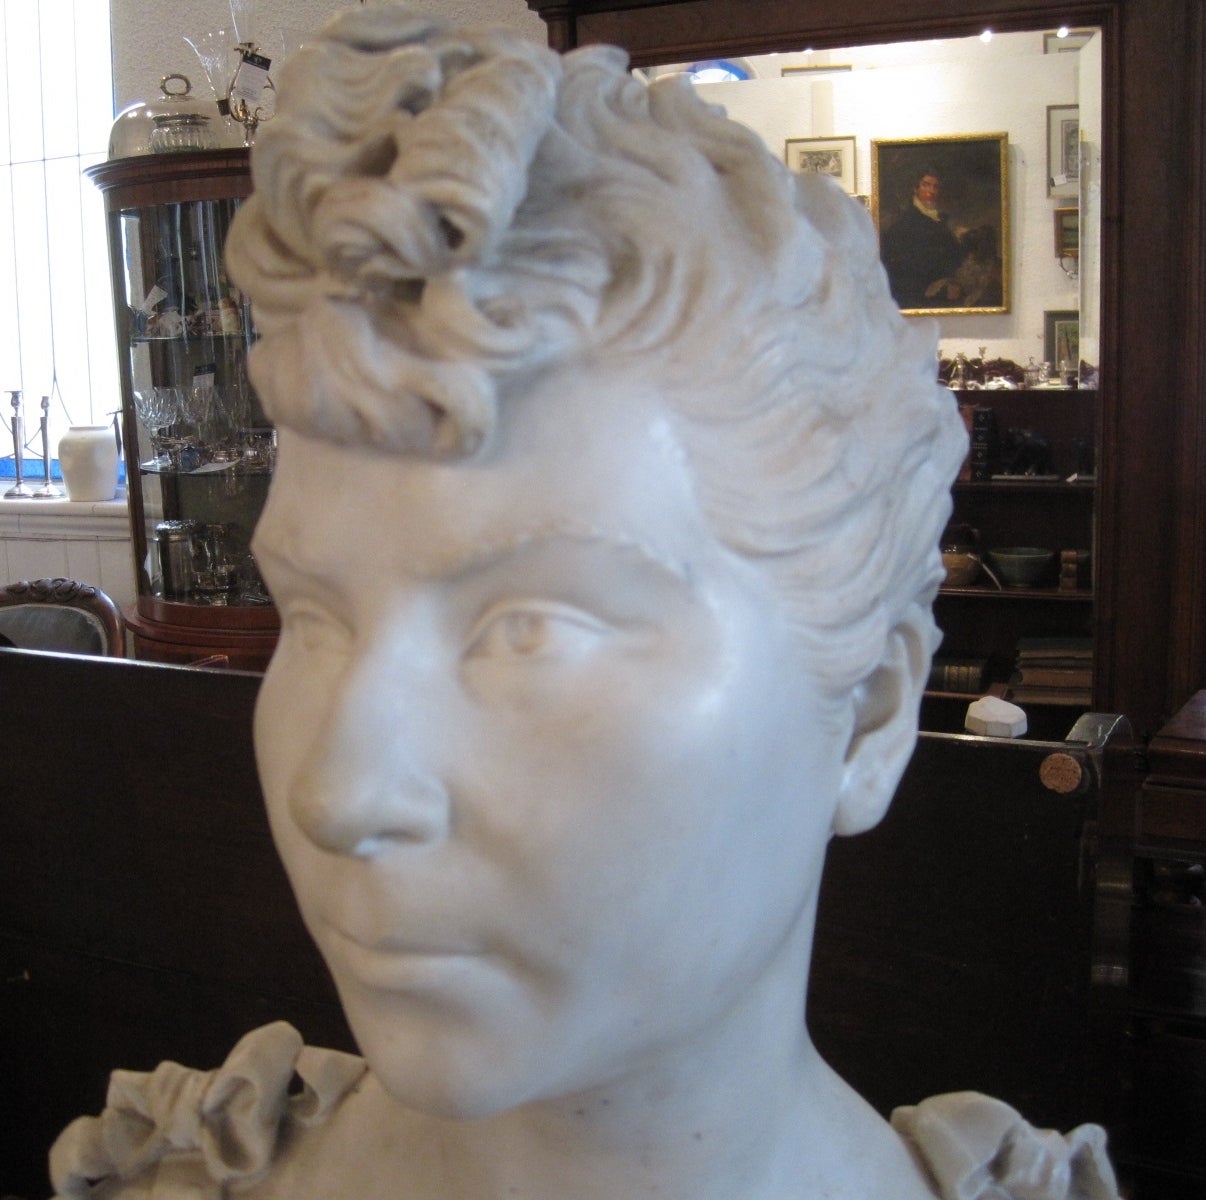 19th century Art Nouveau marble sculpture. Carved from Carrara marble and sitting atop Sienna marble plinth. Signed Ch. Calaneo and dated 1892. Most likely Italian.

Free shipping within the United States and Canada.